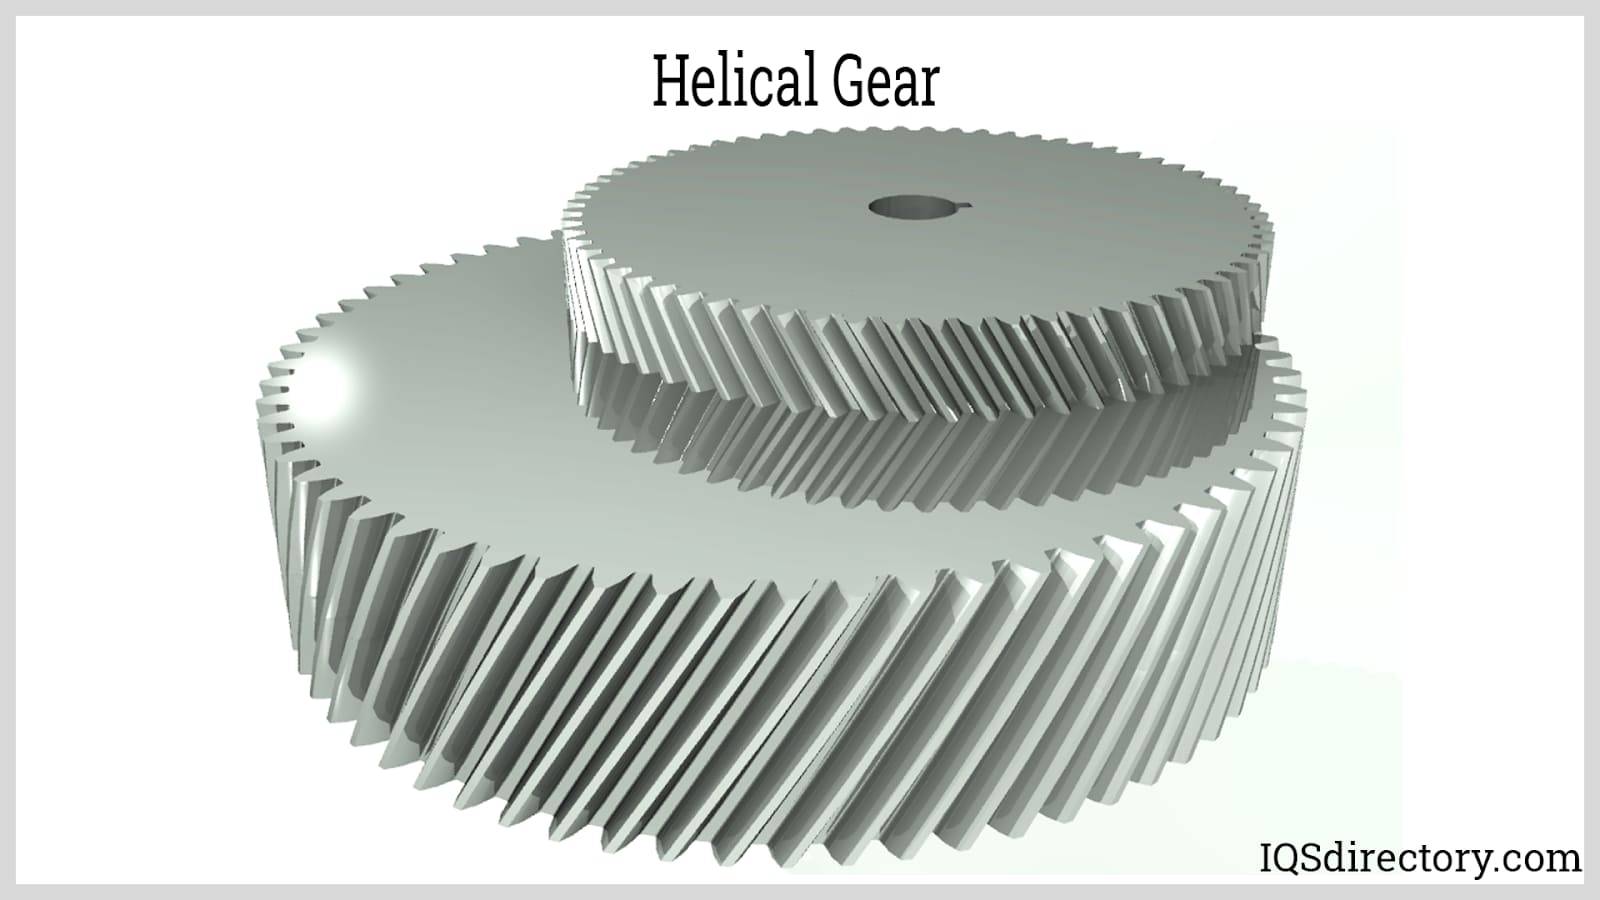 Helical Gear: What Are They? How Do They Work? How to Manufacture